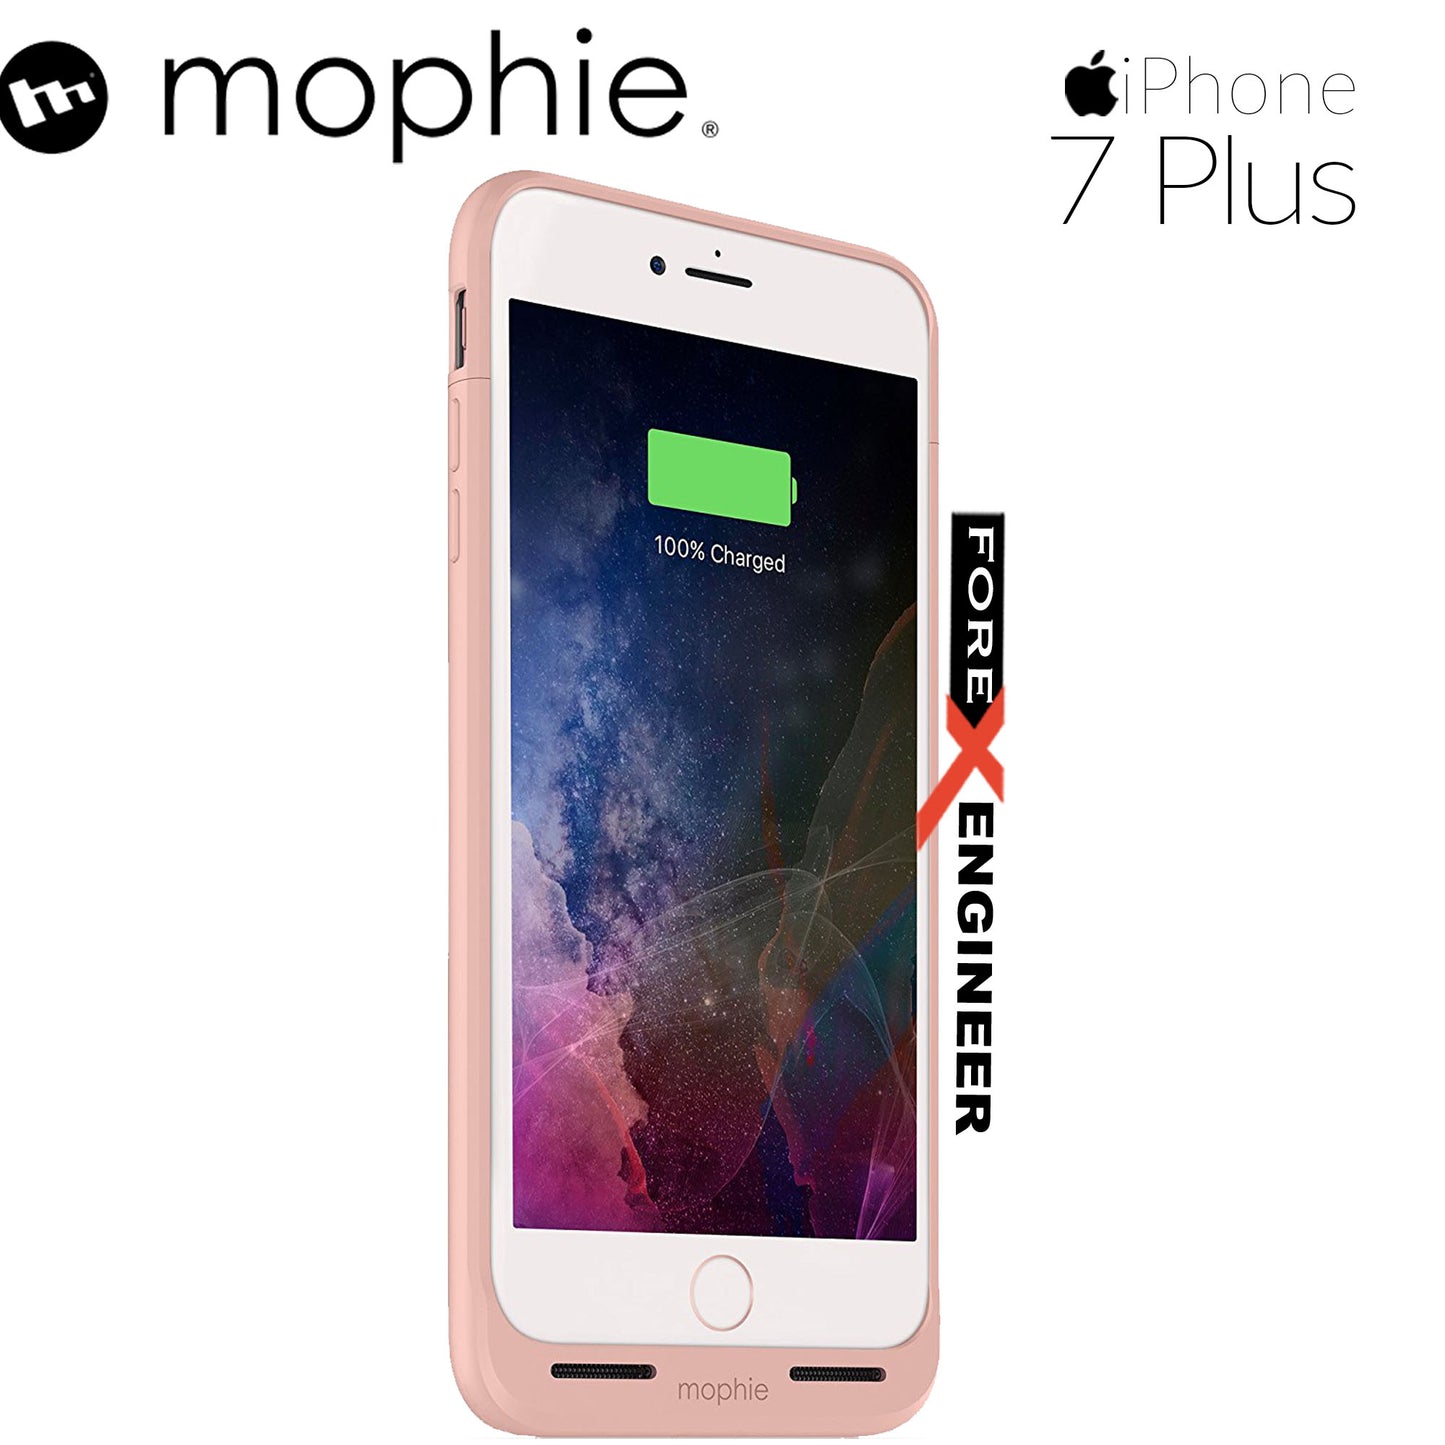 Mophie Juice Pack air for iphone 7 - 8 plus - rose gold color (wireless charge capable)